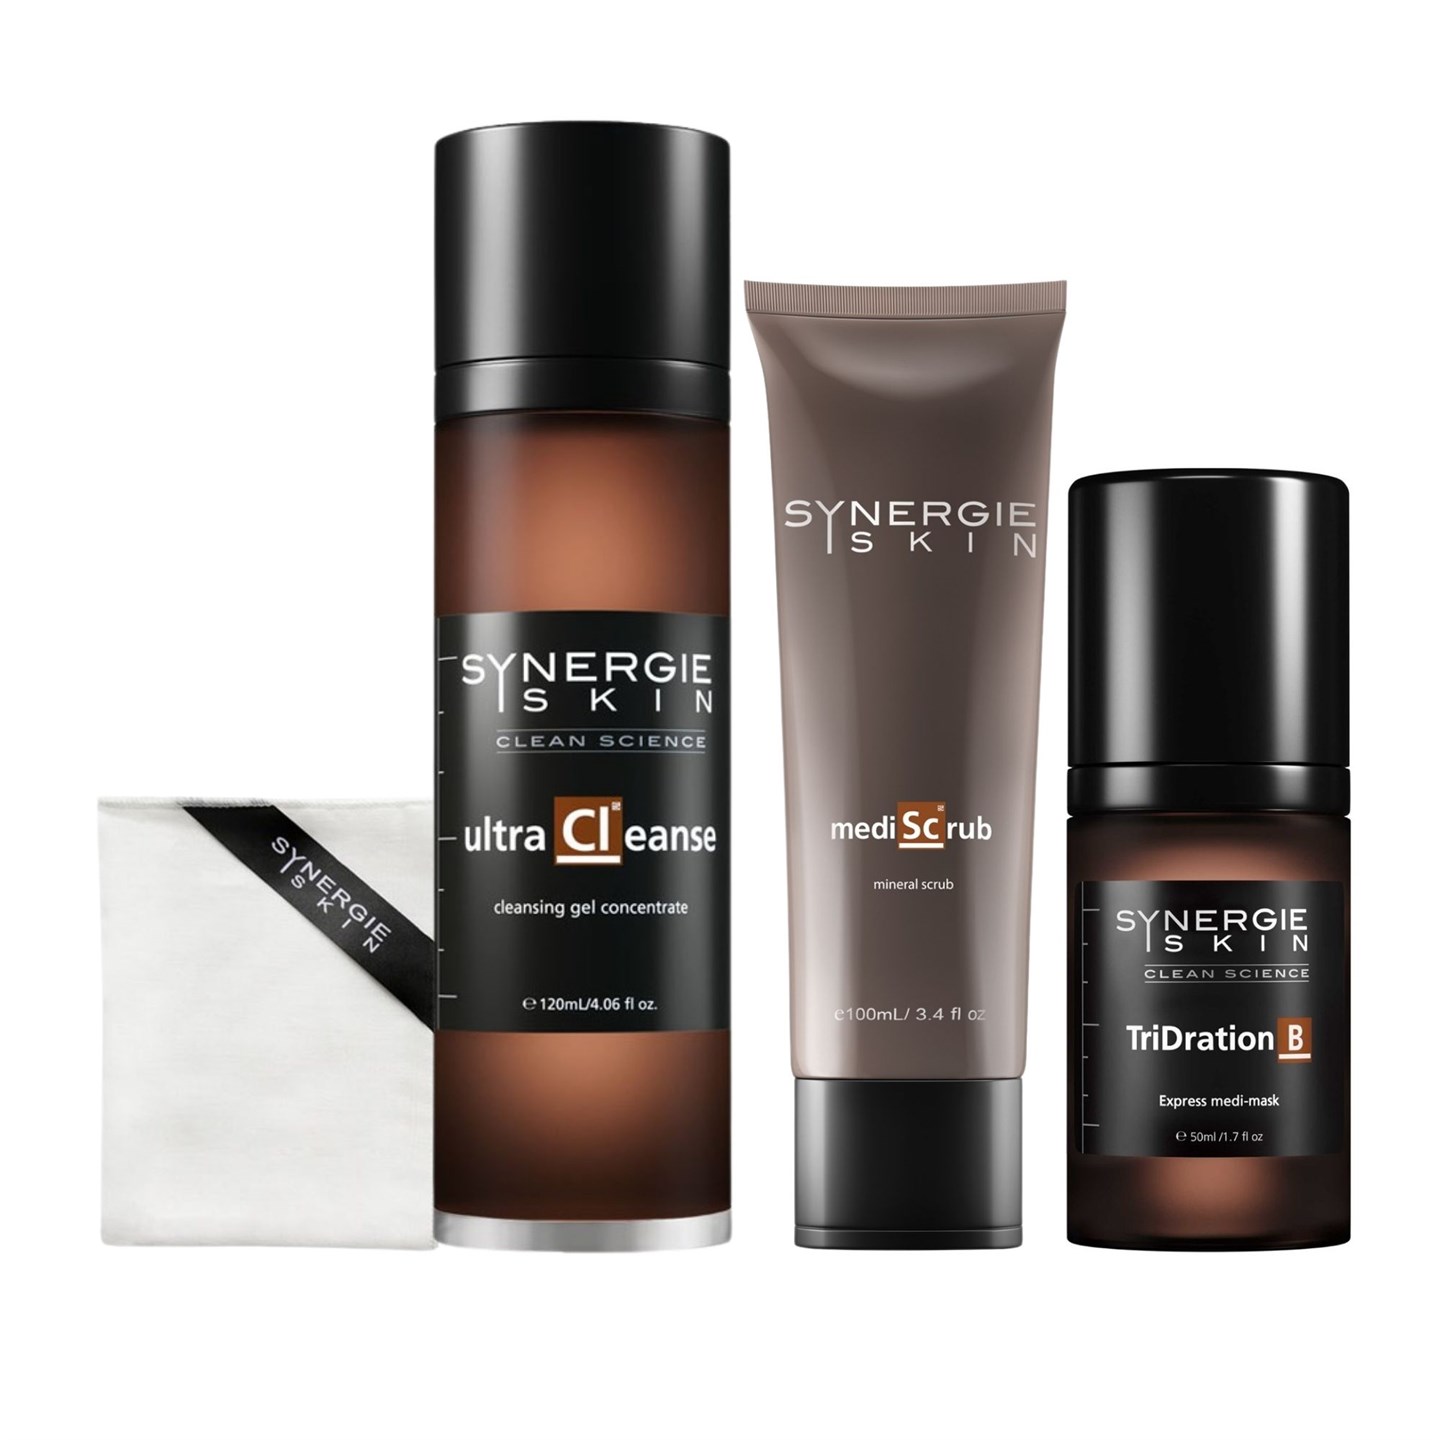 Synergie Express Home Treatment Bundle